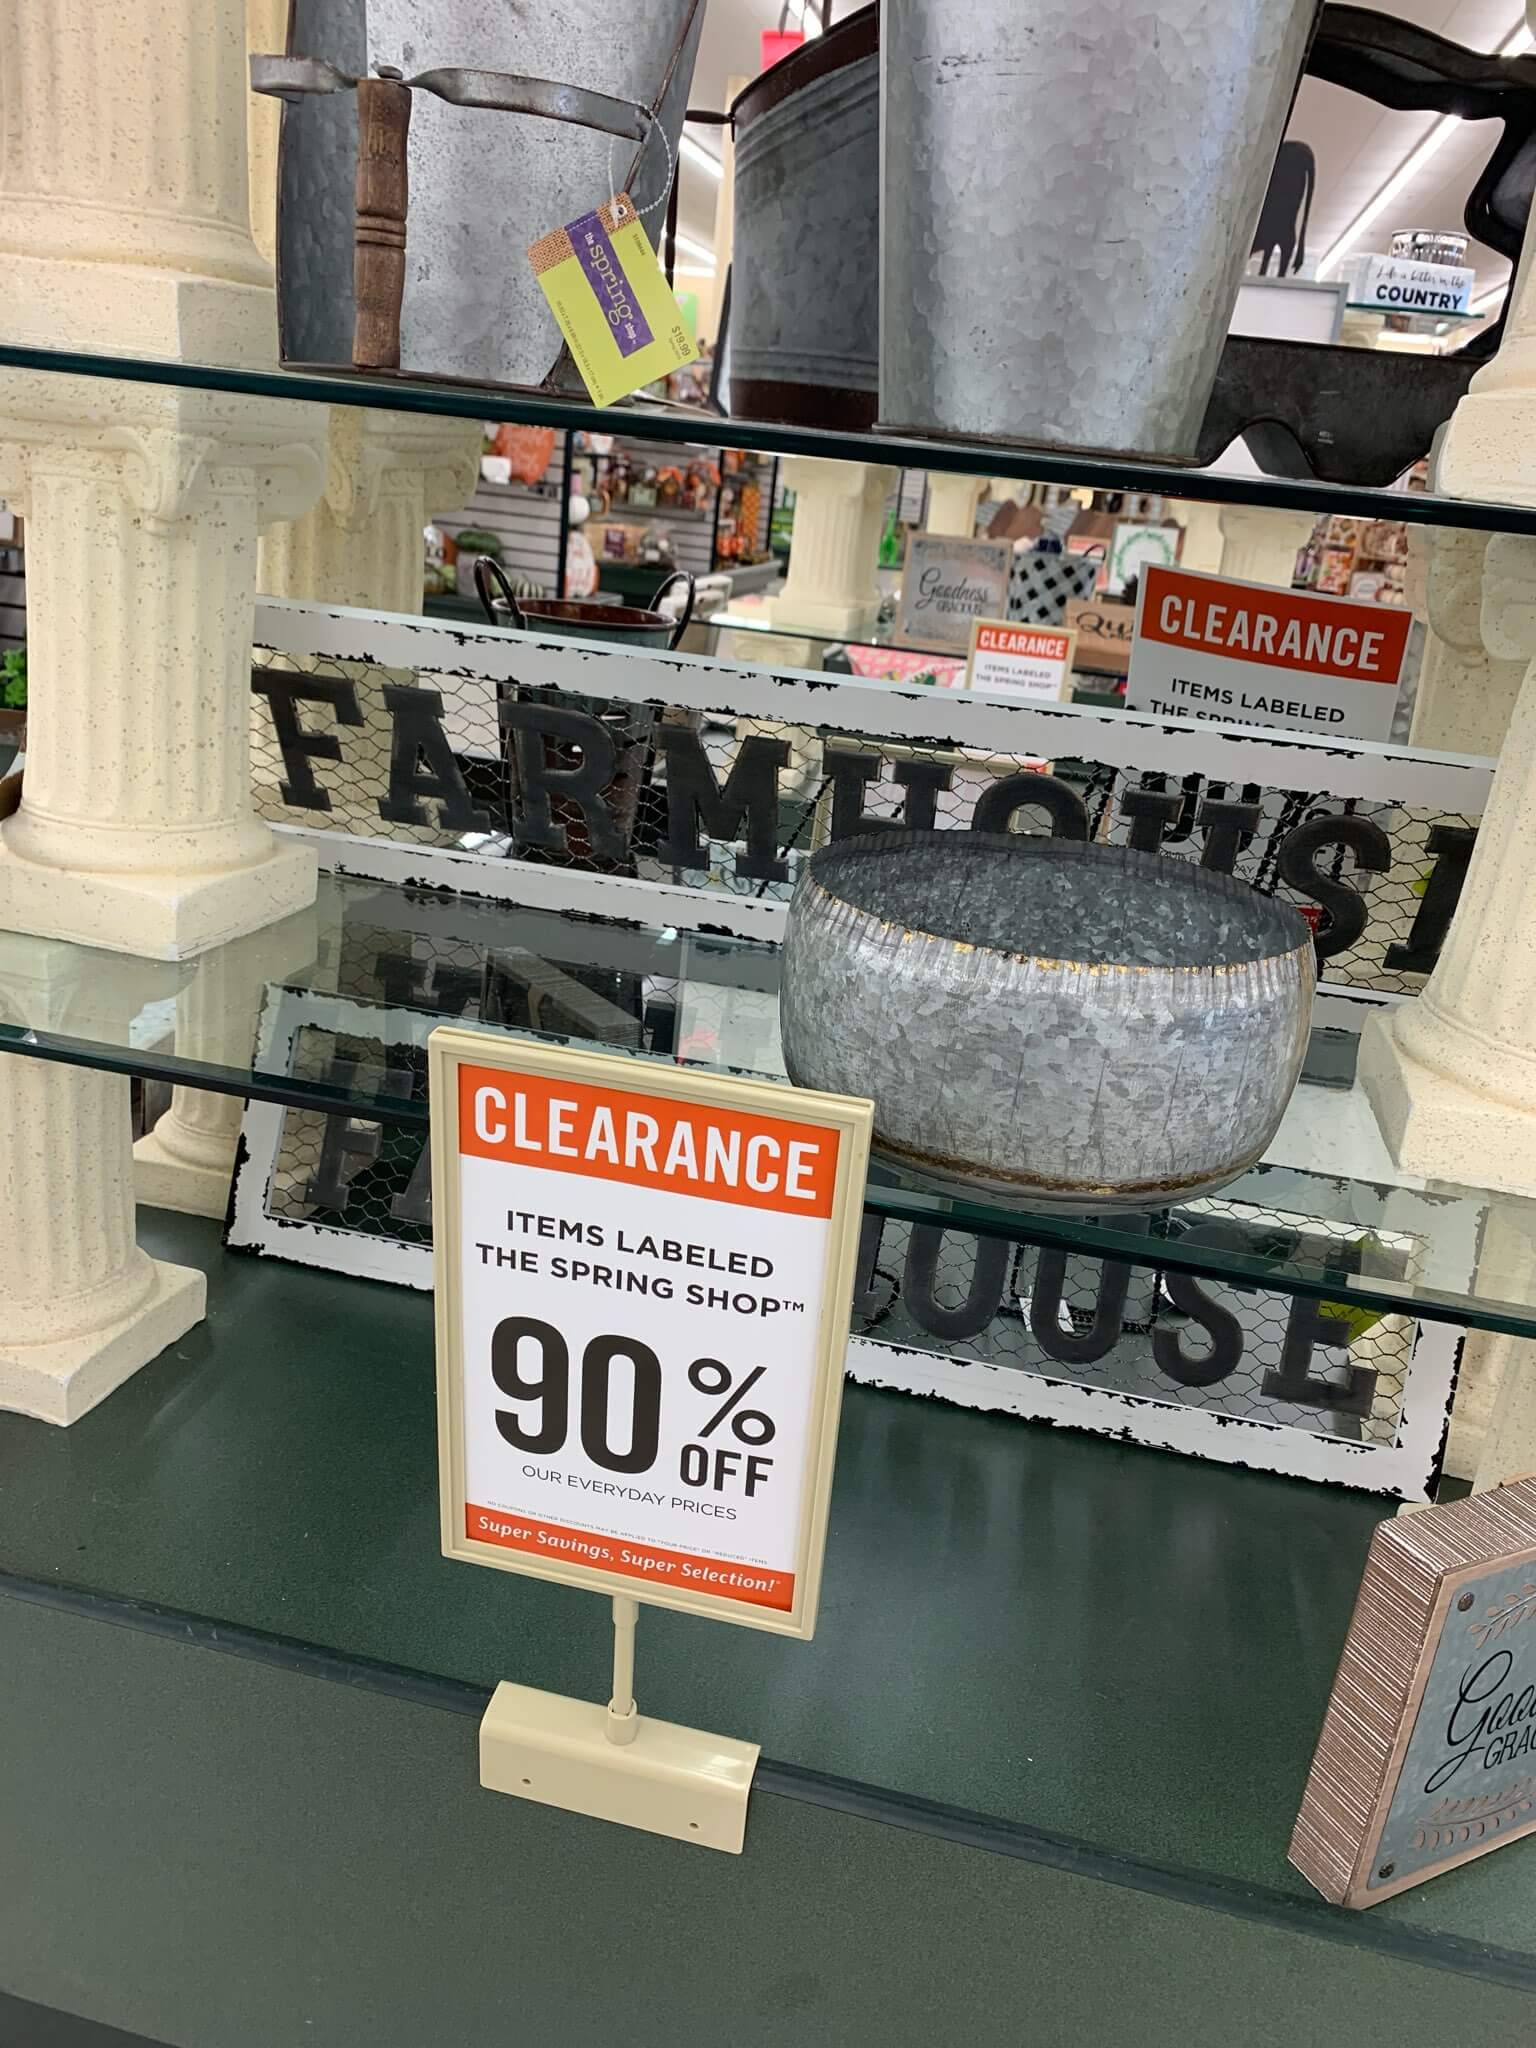 90 off The Spring Shop Decor at Hobby Lobby! Living Rich With Coupons®